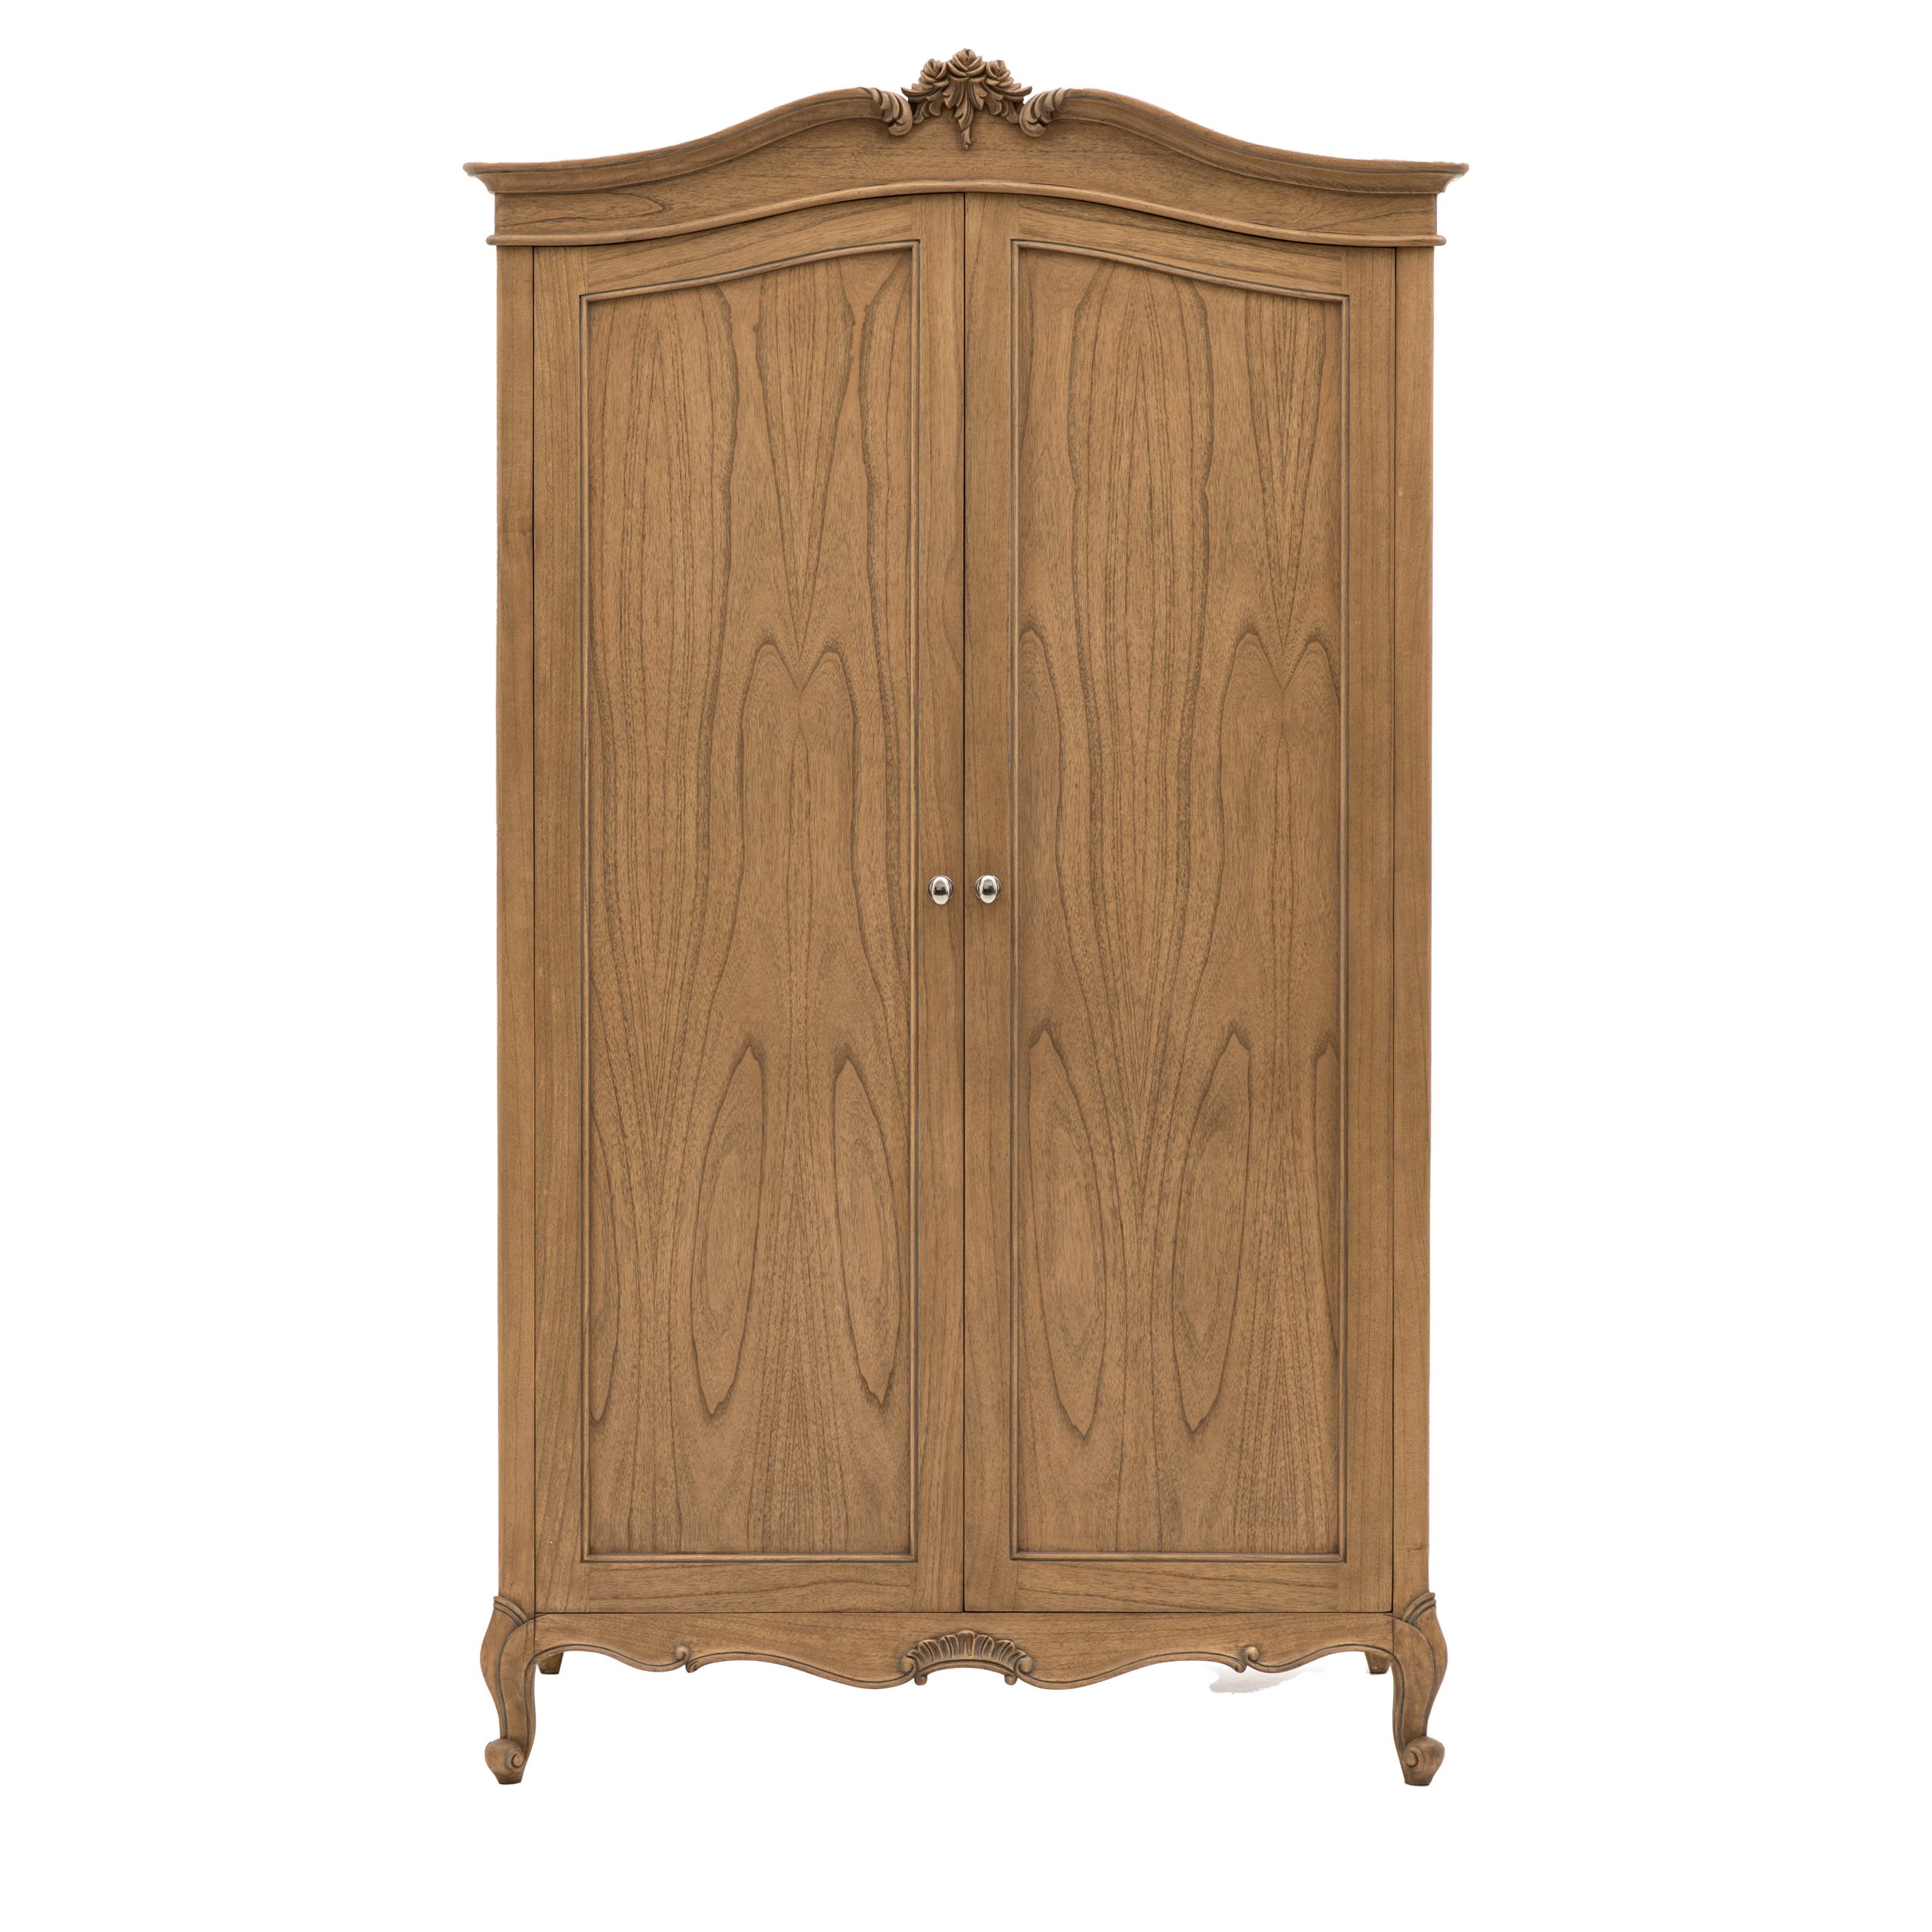 Gallery Direct Chic 2 Door Wardrobe Weathered | Shackletons